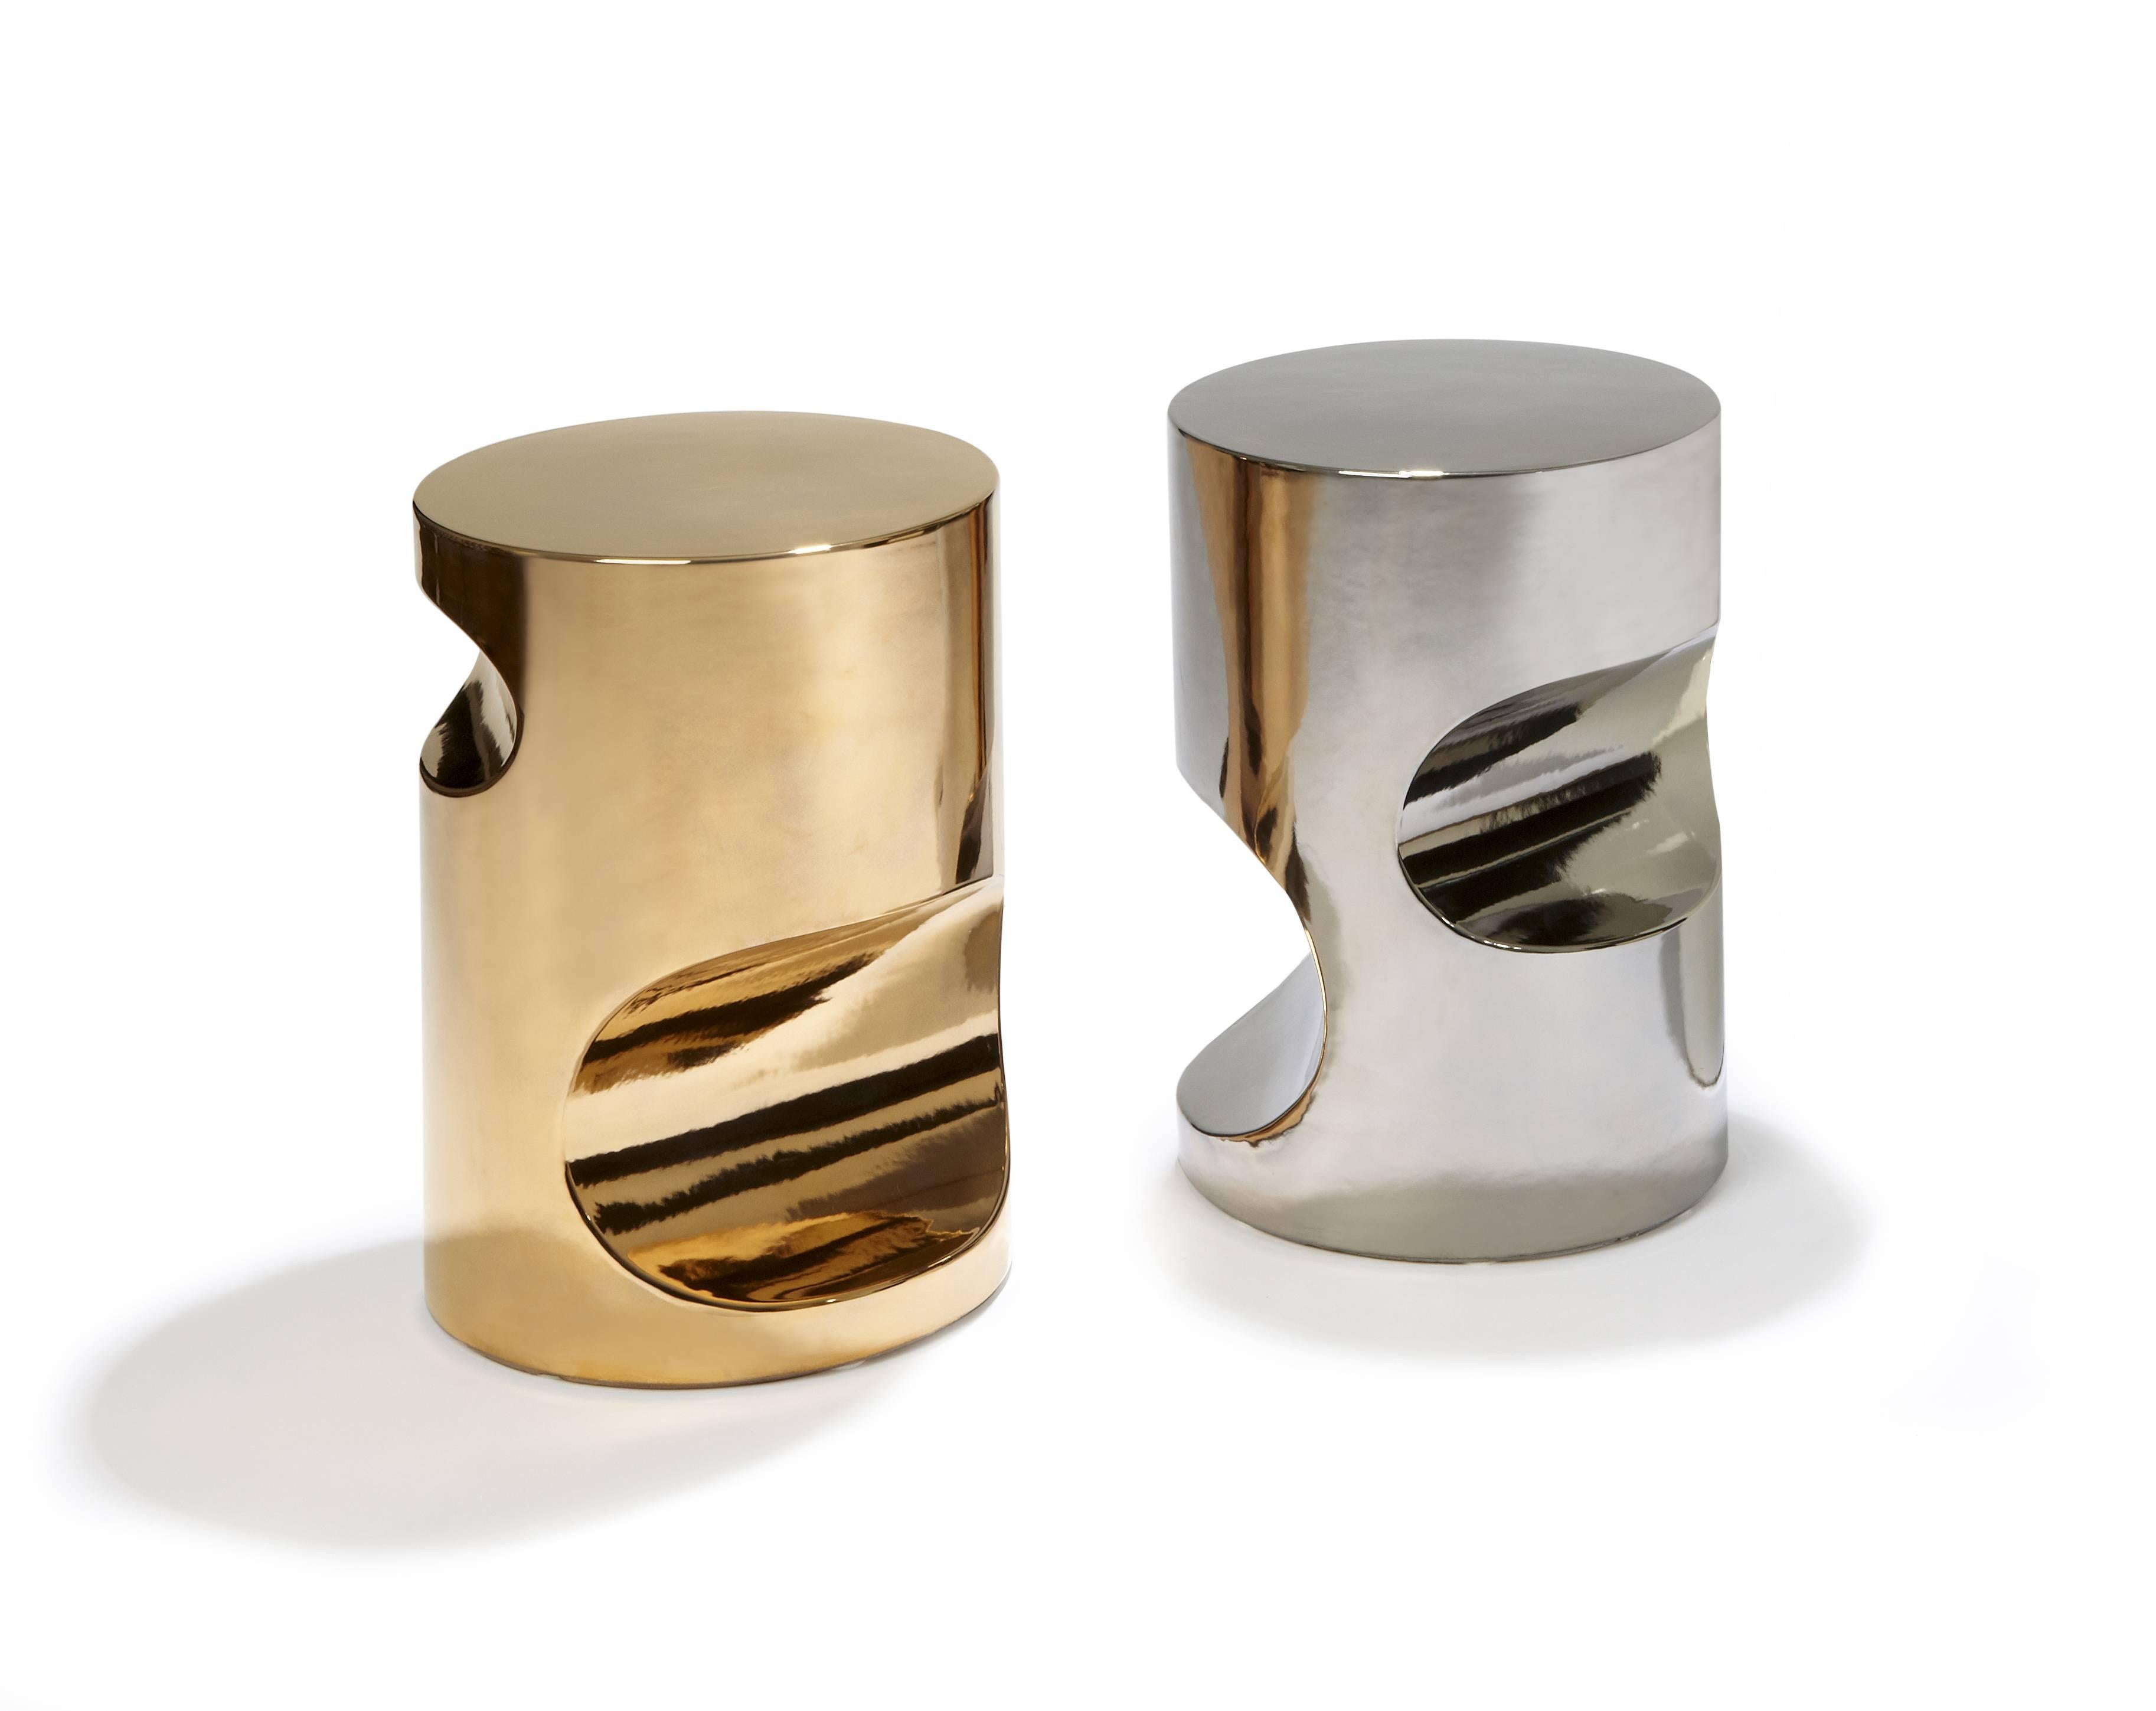 Fétiche ceramic stool, designed by Hervé Langlais, in gilded or platinum color, for Galerie Negropontes in Paris, France. 
French designer Herve Langlais created a series of pouf named after his Fétiche table lamp. Fetish pouf are in ceramic with